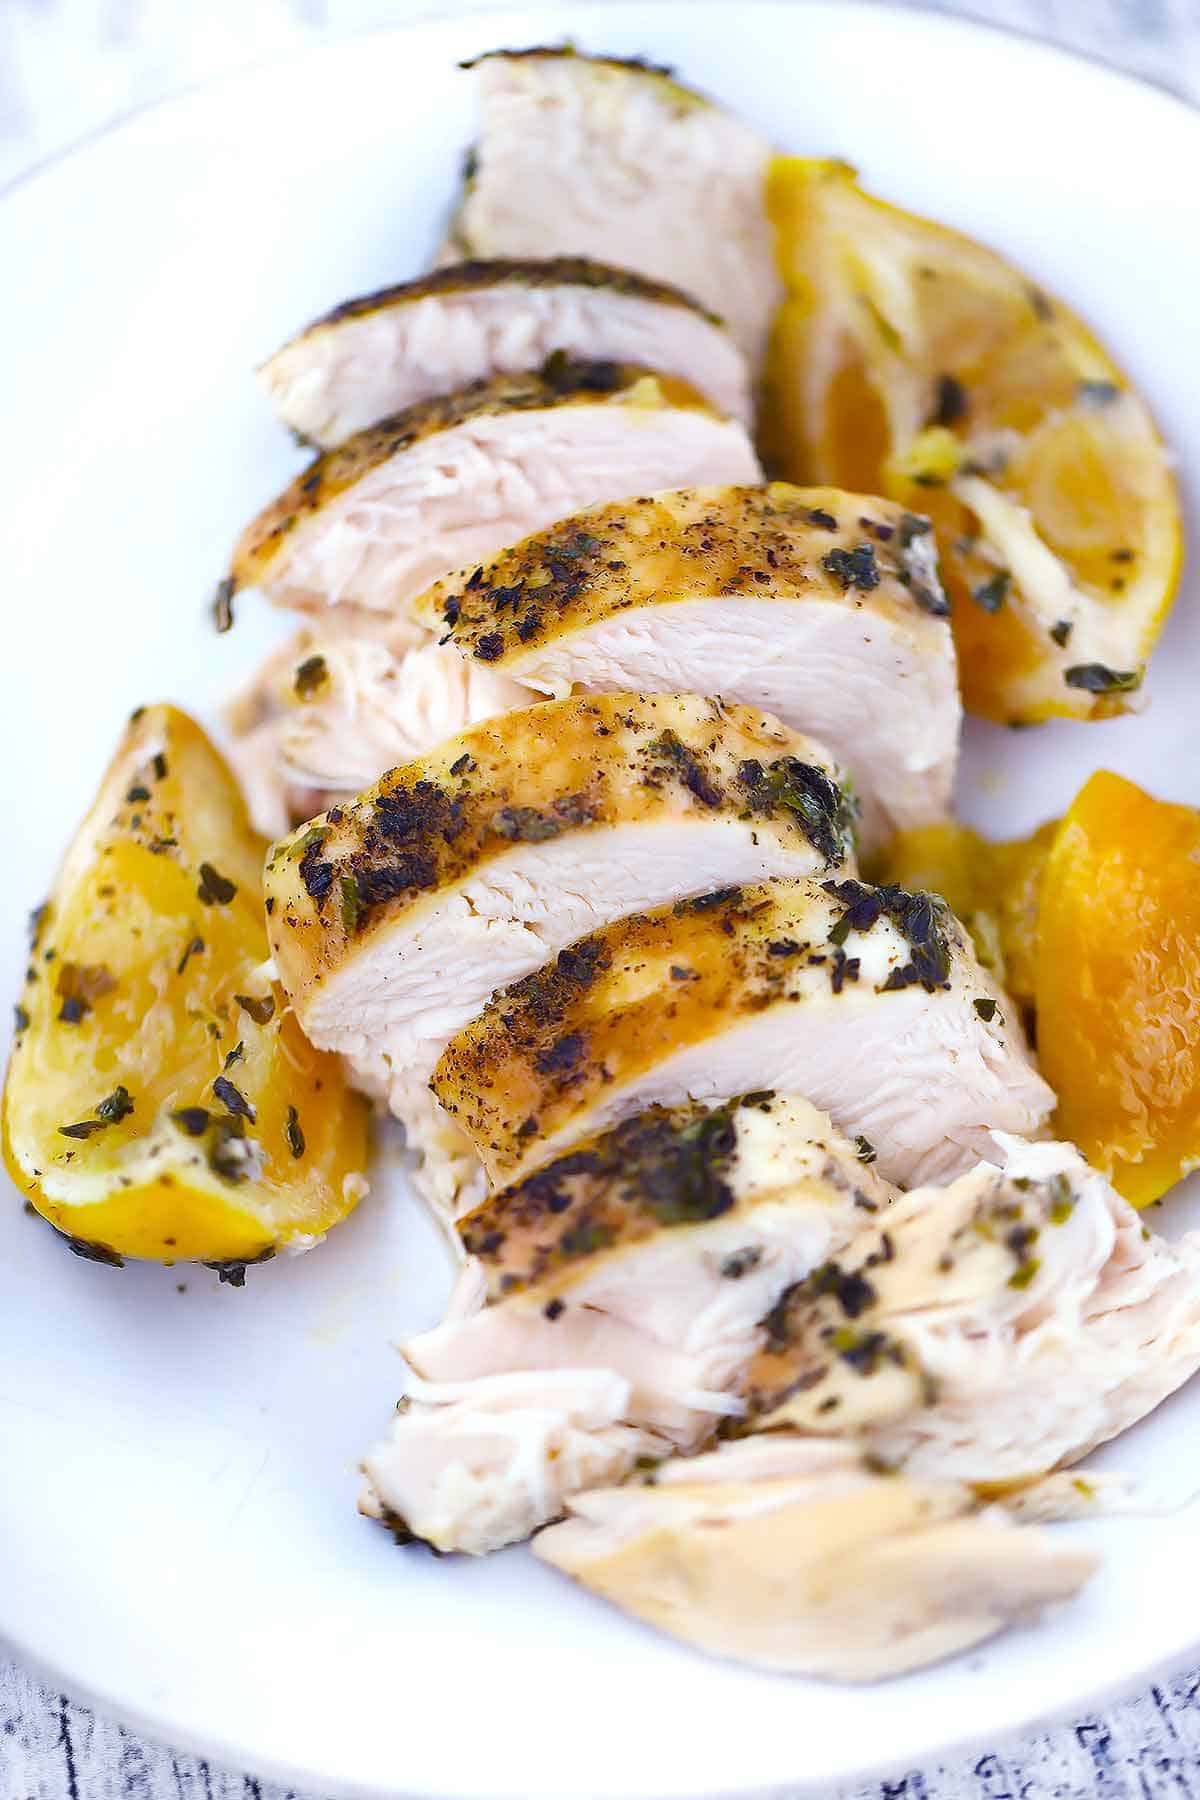 A sliced chicken breast on a white plate with lemon wedges.